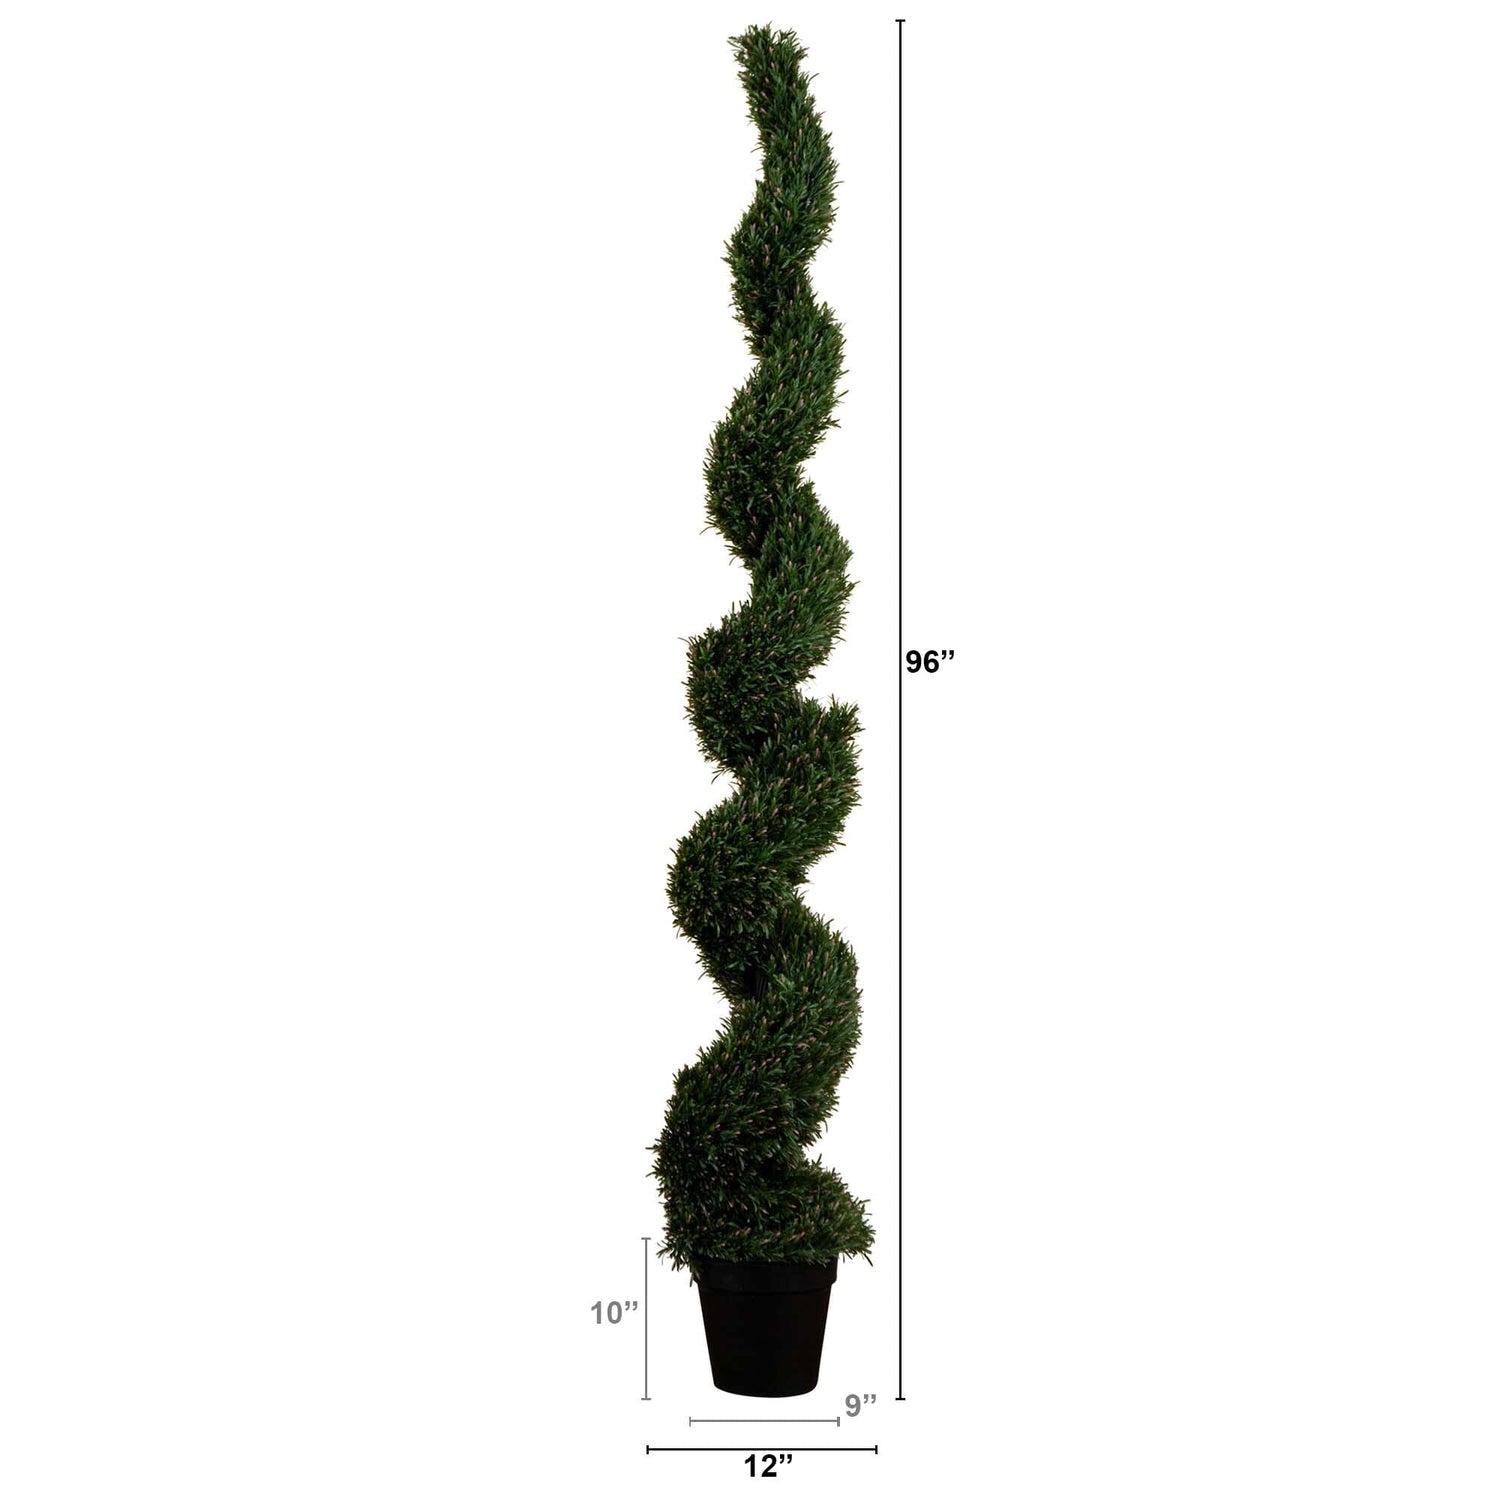 8' UV Resistant Artificial Rosemary Spiral Topiary Tree (Indoor/Outdoor)